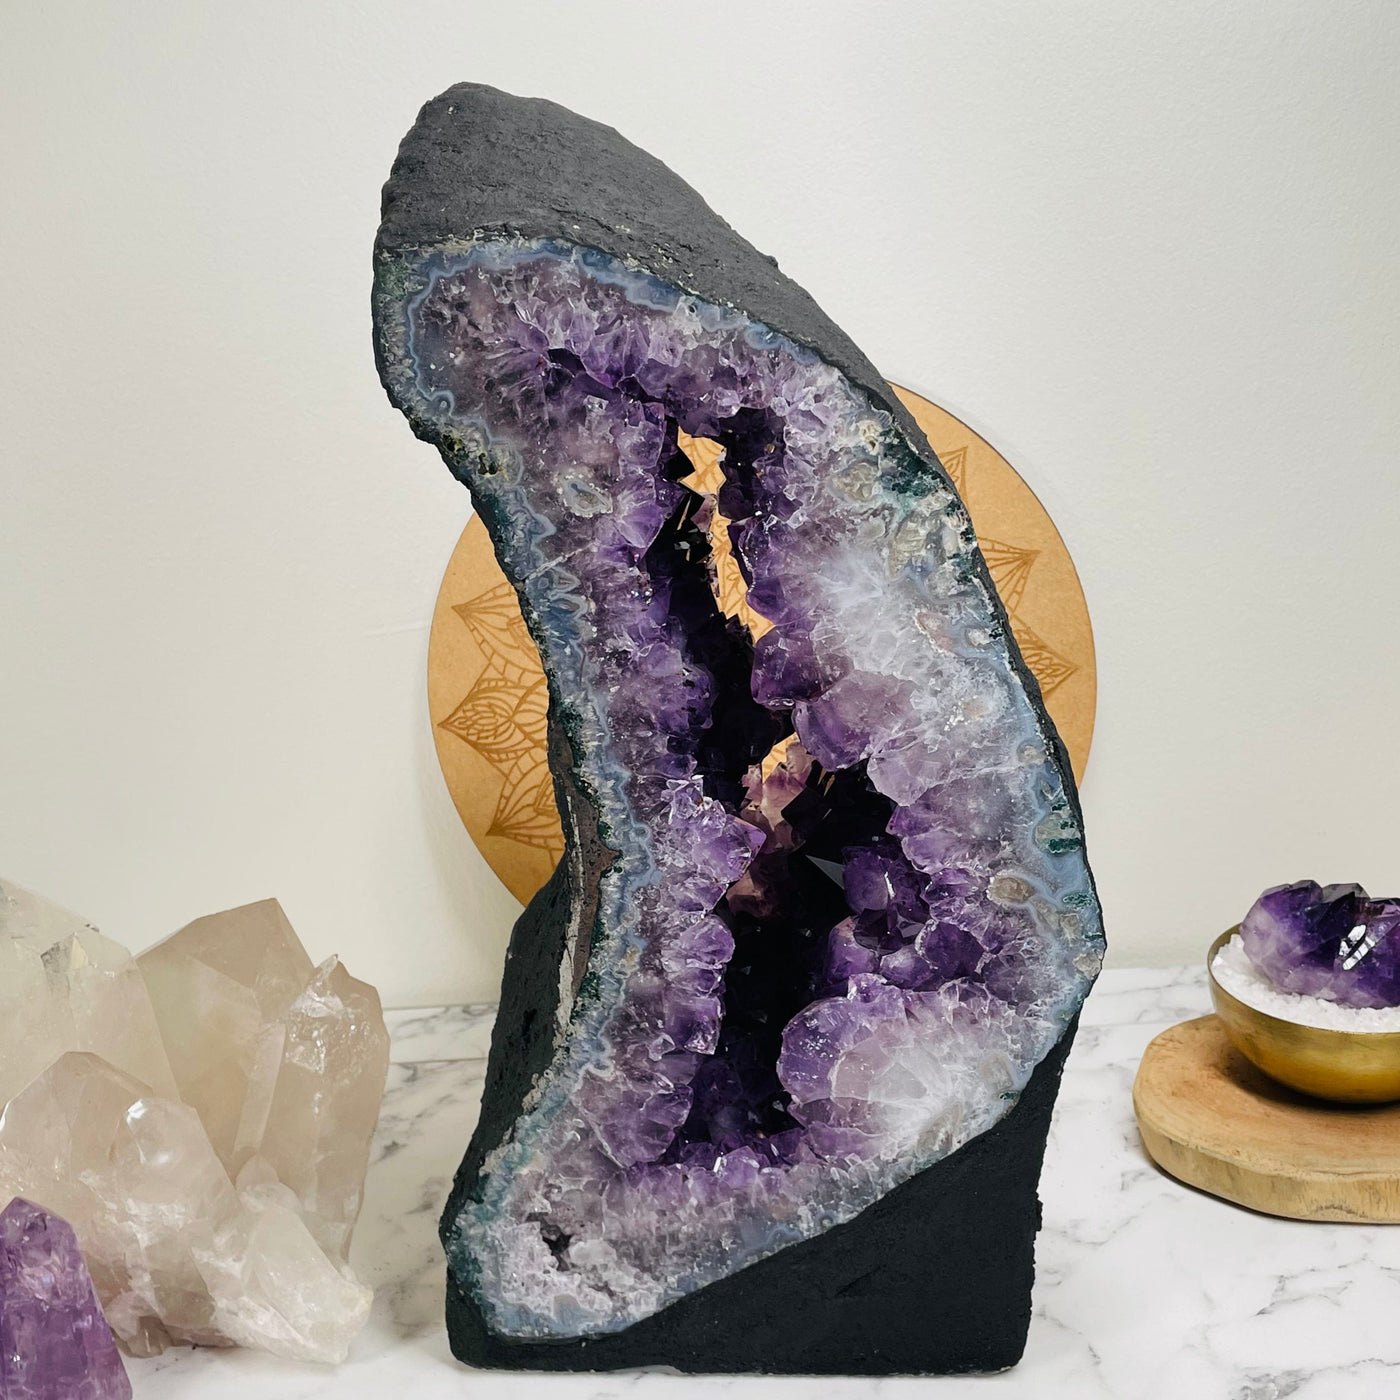 back side of the amethyst portal shaped as a moon crescent 